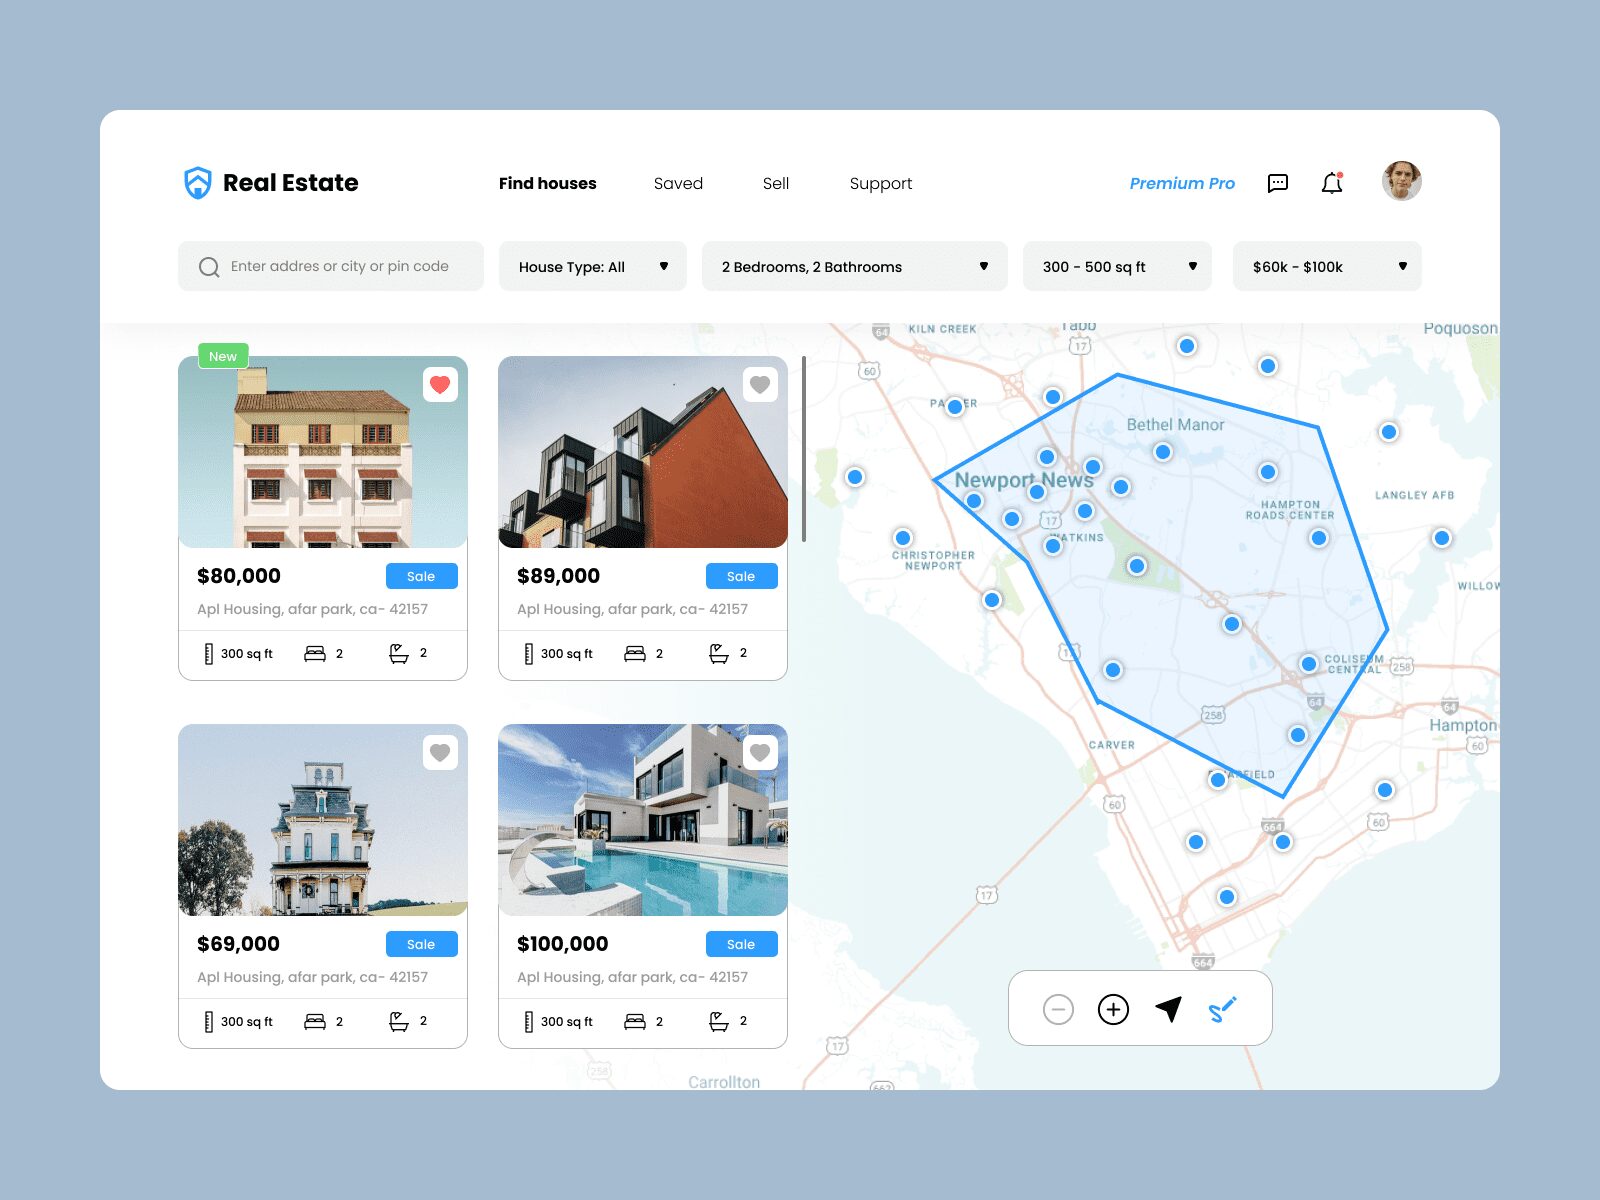 Navigation and outside view. Map integration helps your prospects find the right place thanks to its exact location. You can look closely at the area via Google Maps and get a deeper understanding. The Smart Map can identify landmarks or well-known places.